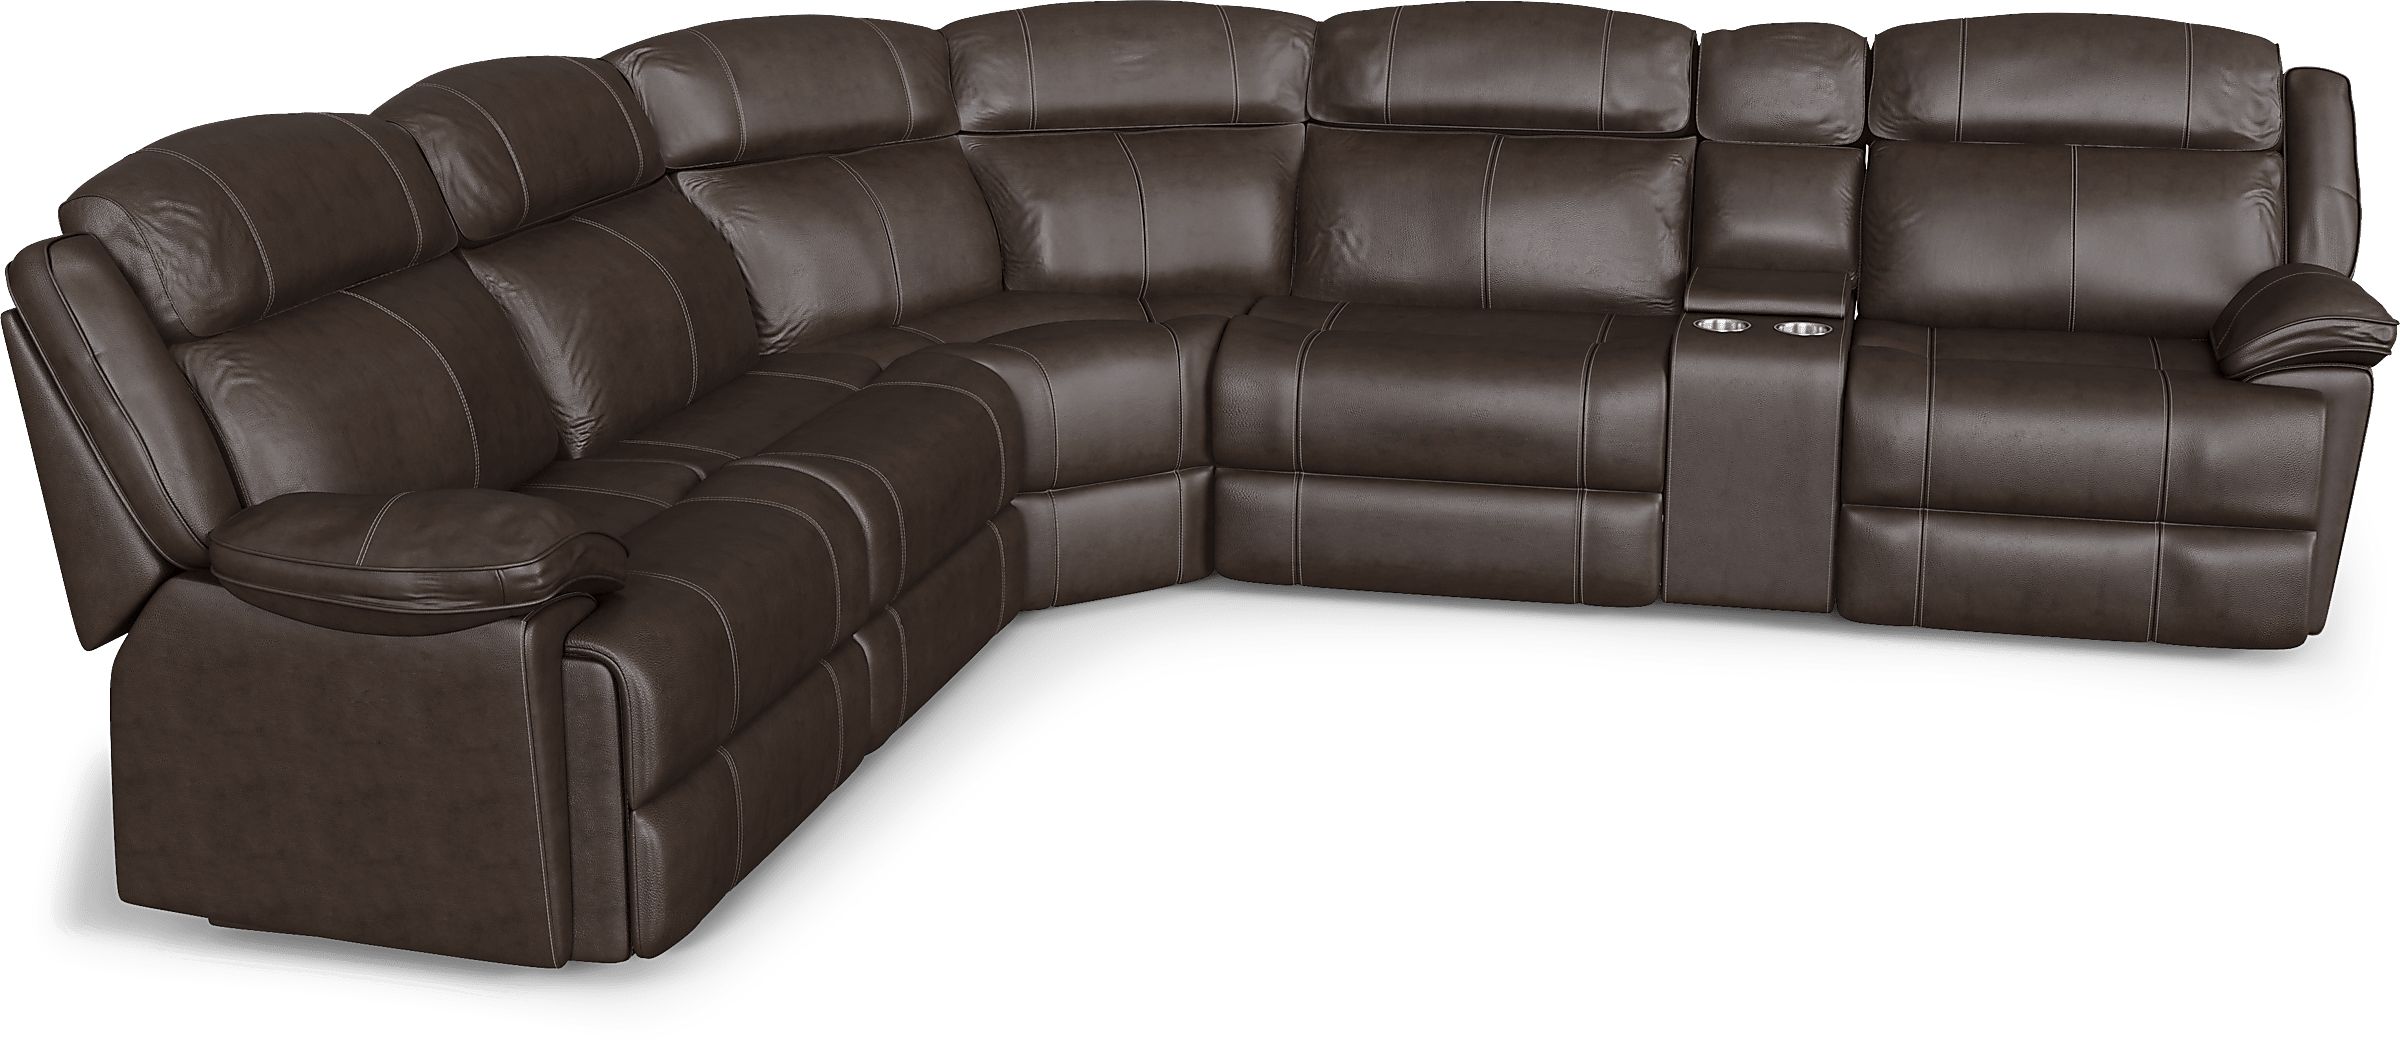 West Valley Brown 6 Pc Leather Reclining Sectional